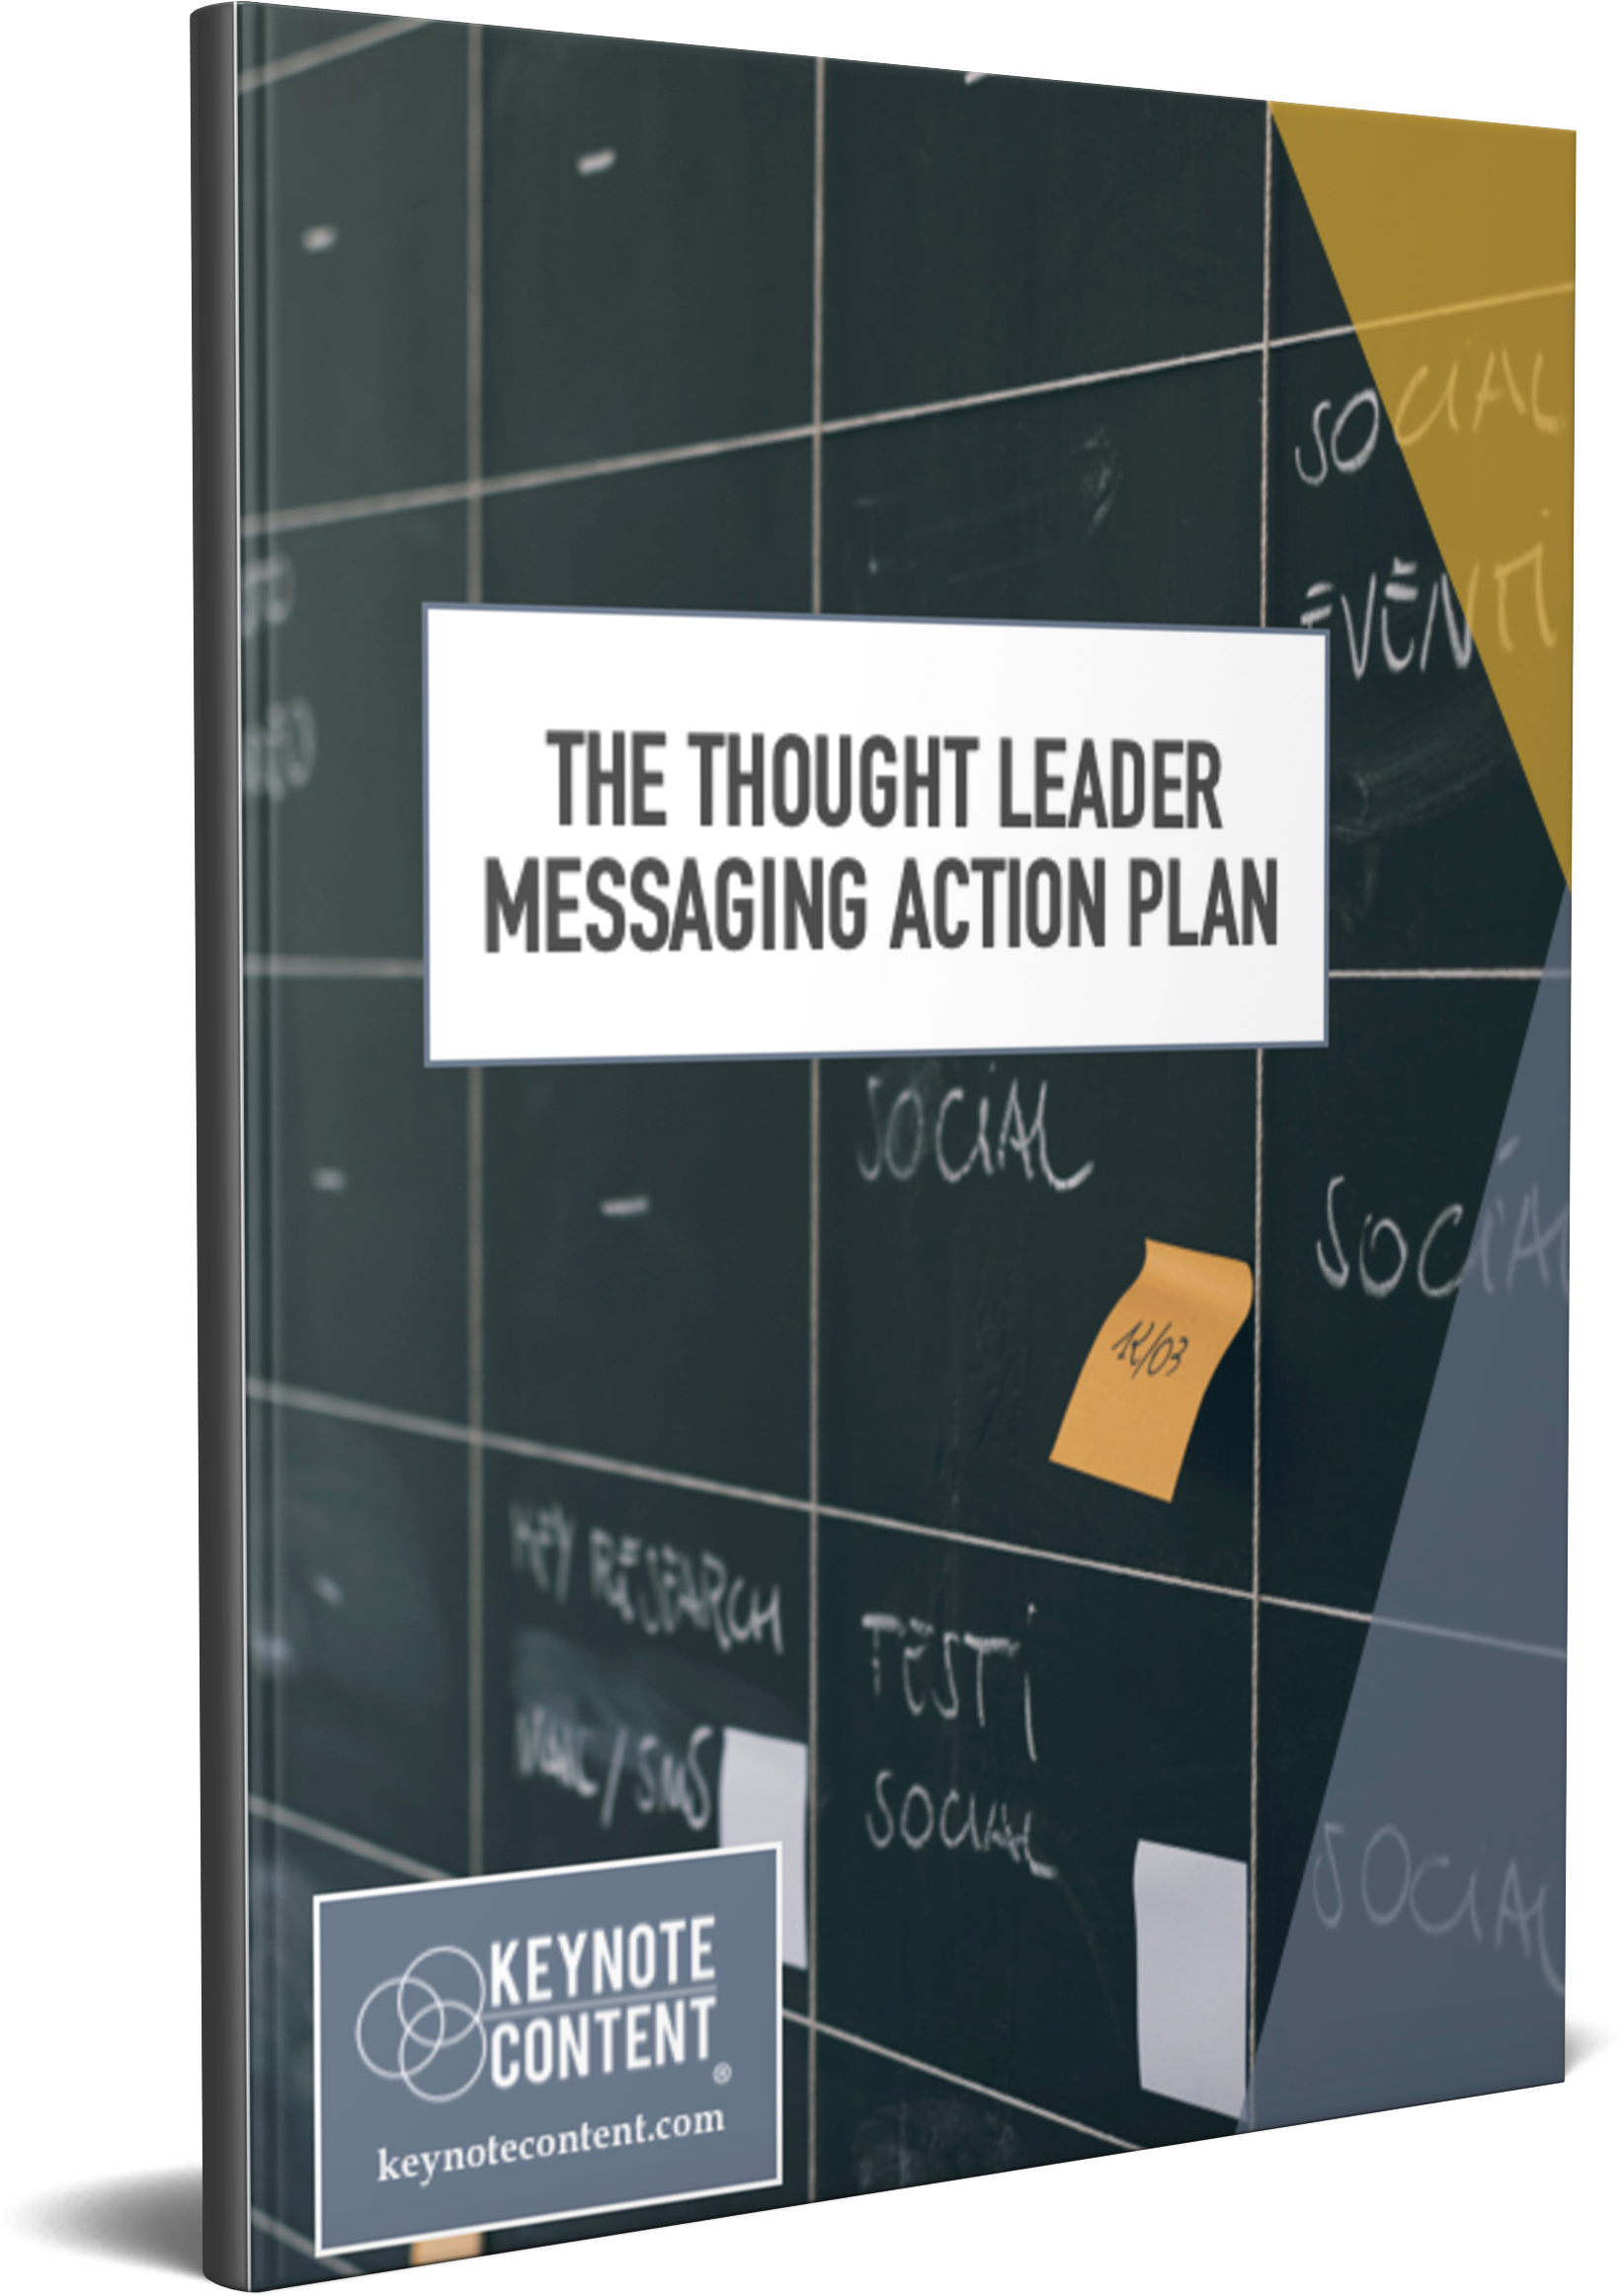 The Thought Leader Messaging Action Plan | Keynote Content with Jon Cook